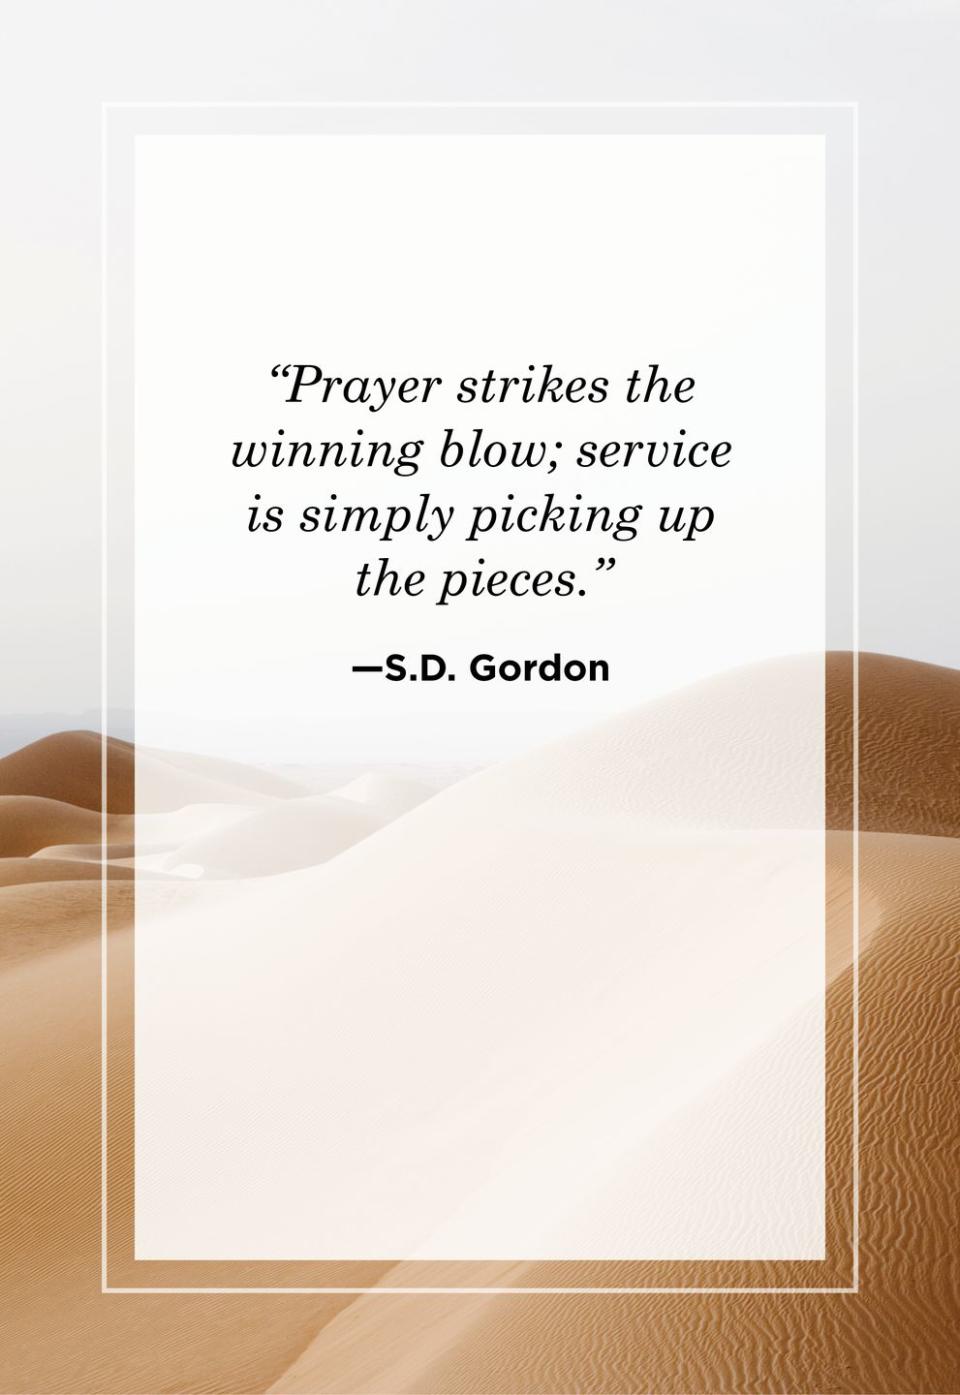 <p>"Prayer strikes the winning blow; service is simply picking up the pieces."</p>